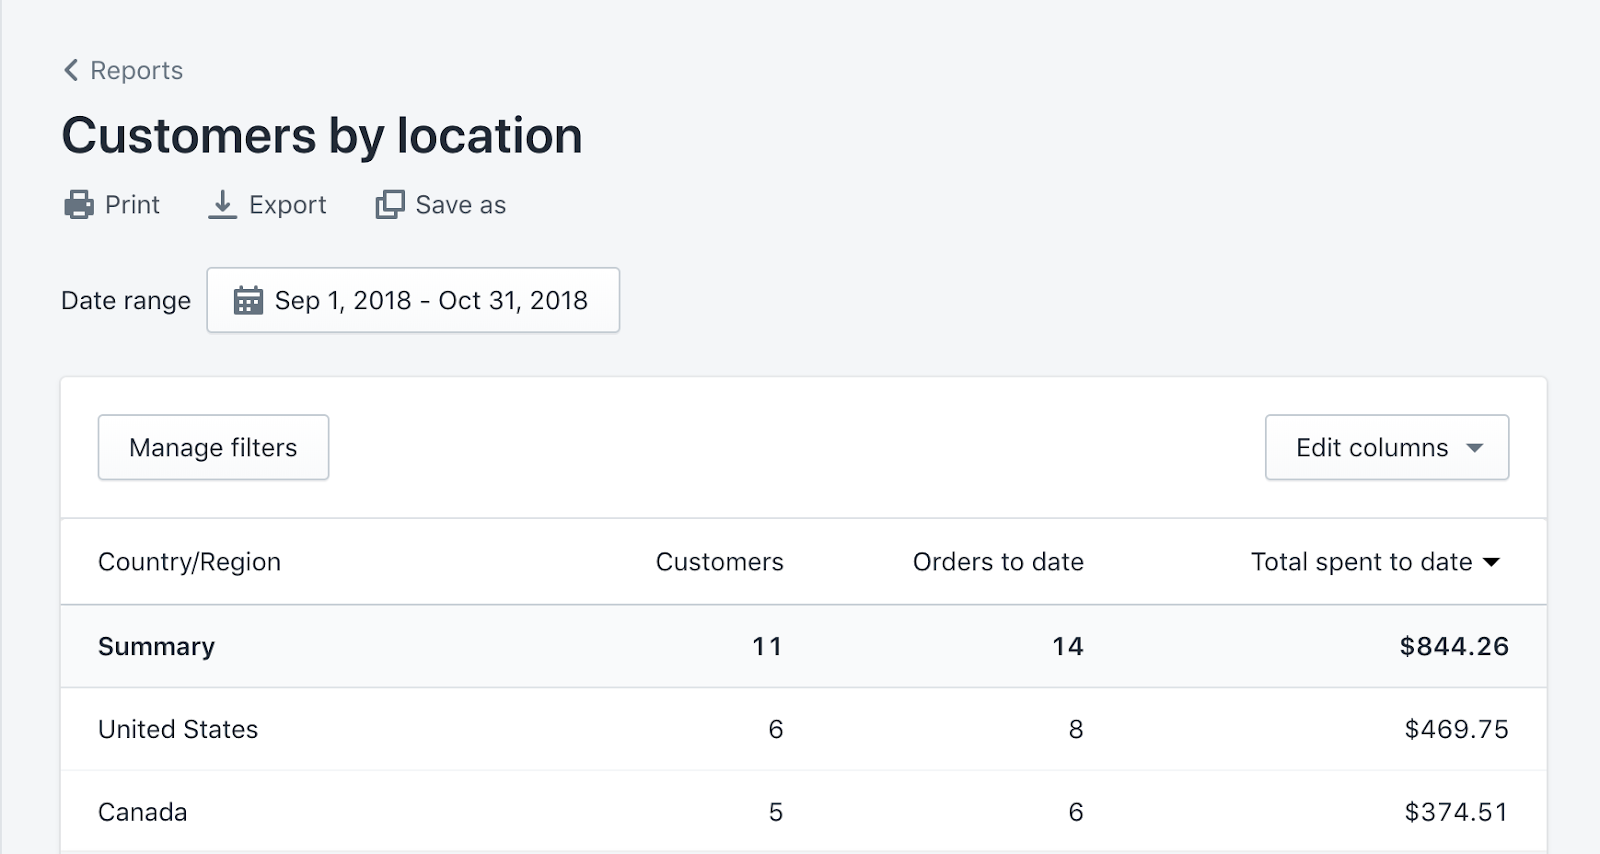 Global Marketing Strategy: Screenshot of "Customers by location" report